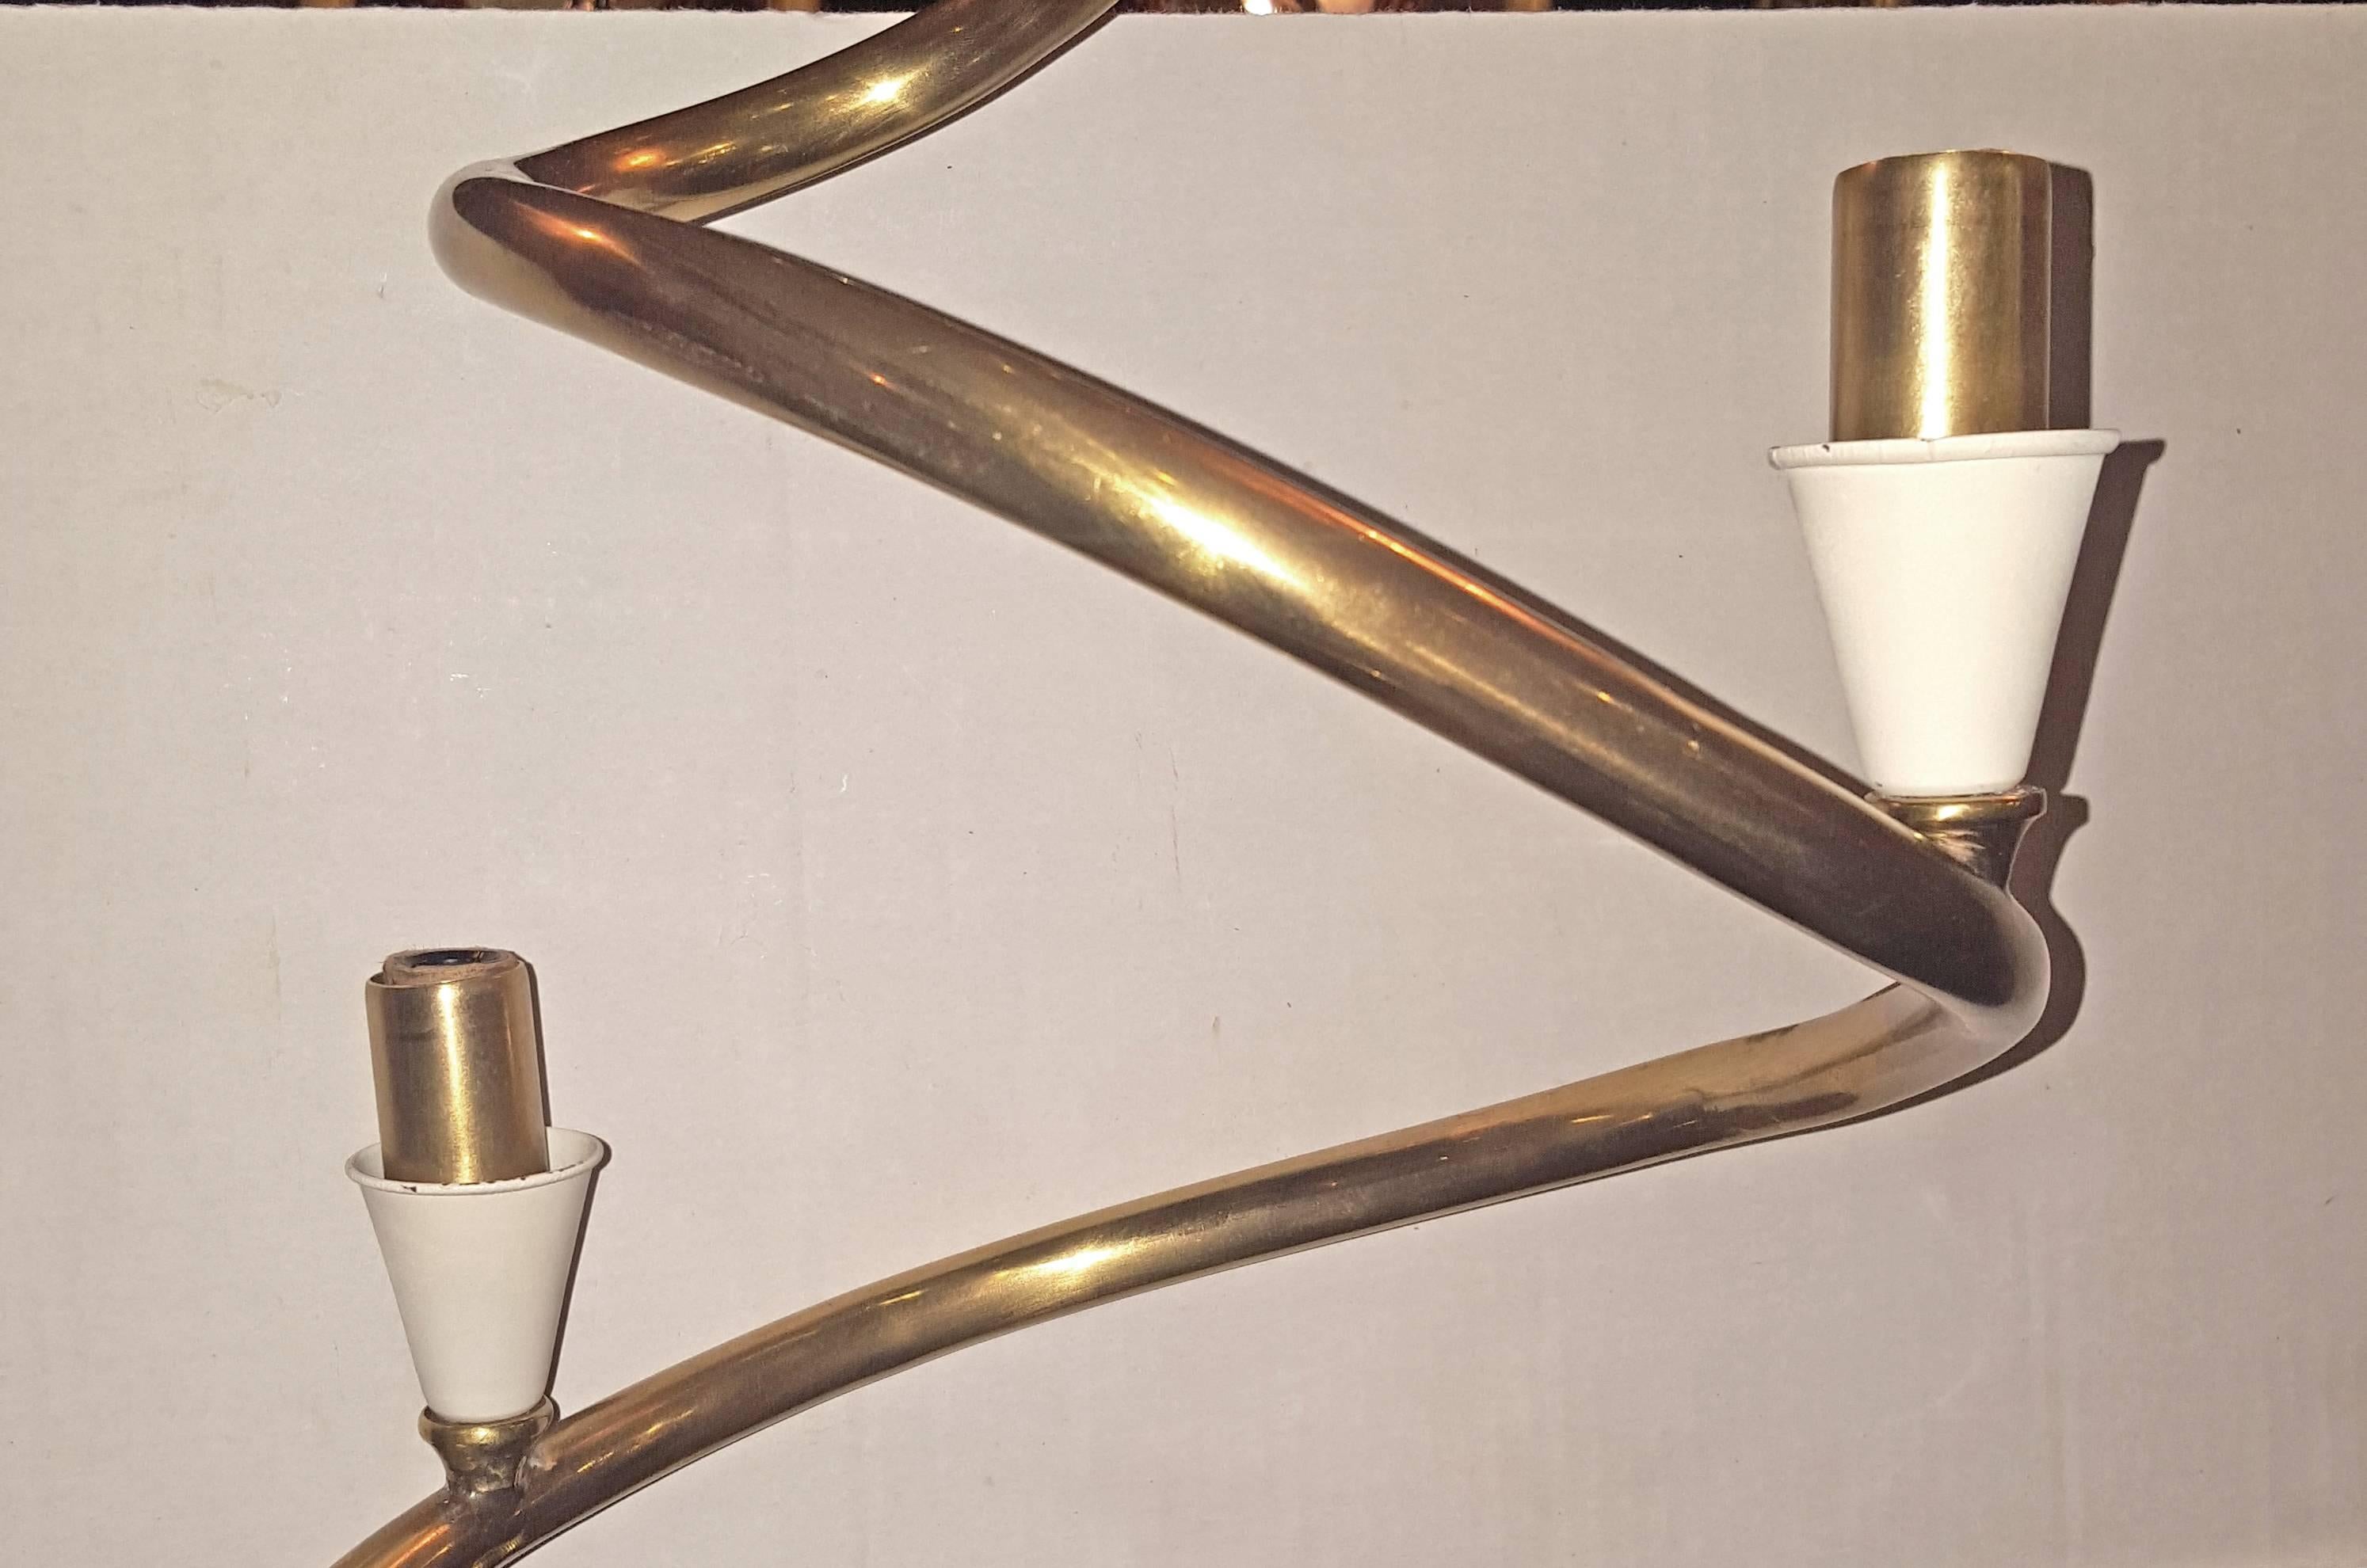 A pair of Italian circa 1960's moderne style spiral chandeliers with 12 lights, gilt and painted finish. Sold individually.

Measurements:
Diameter: 49